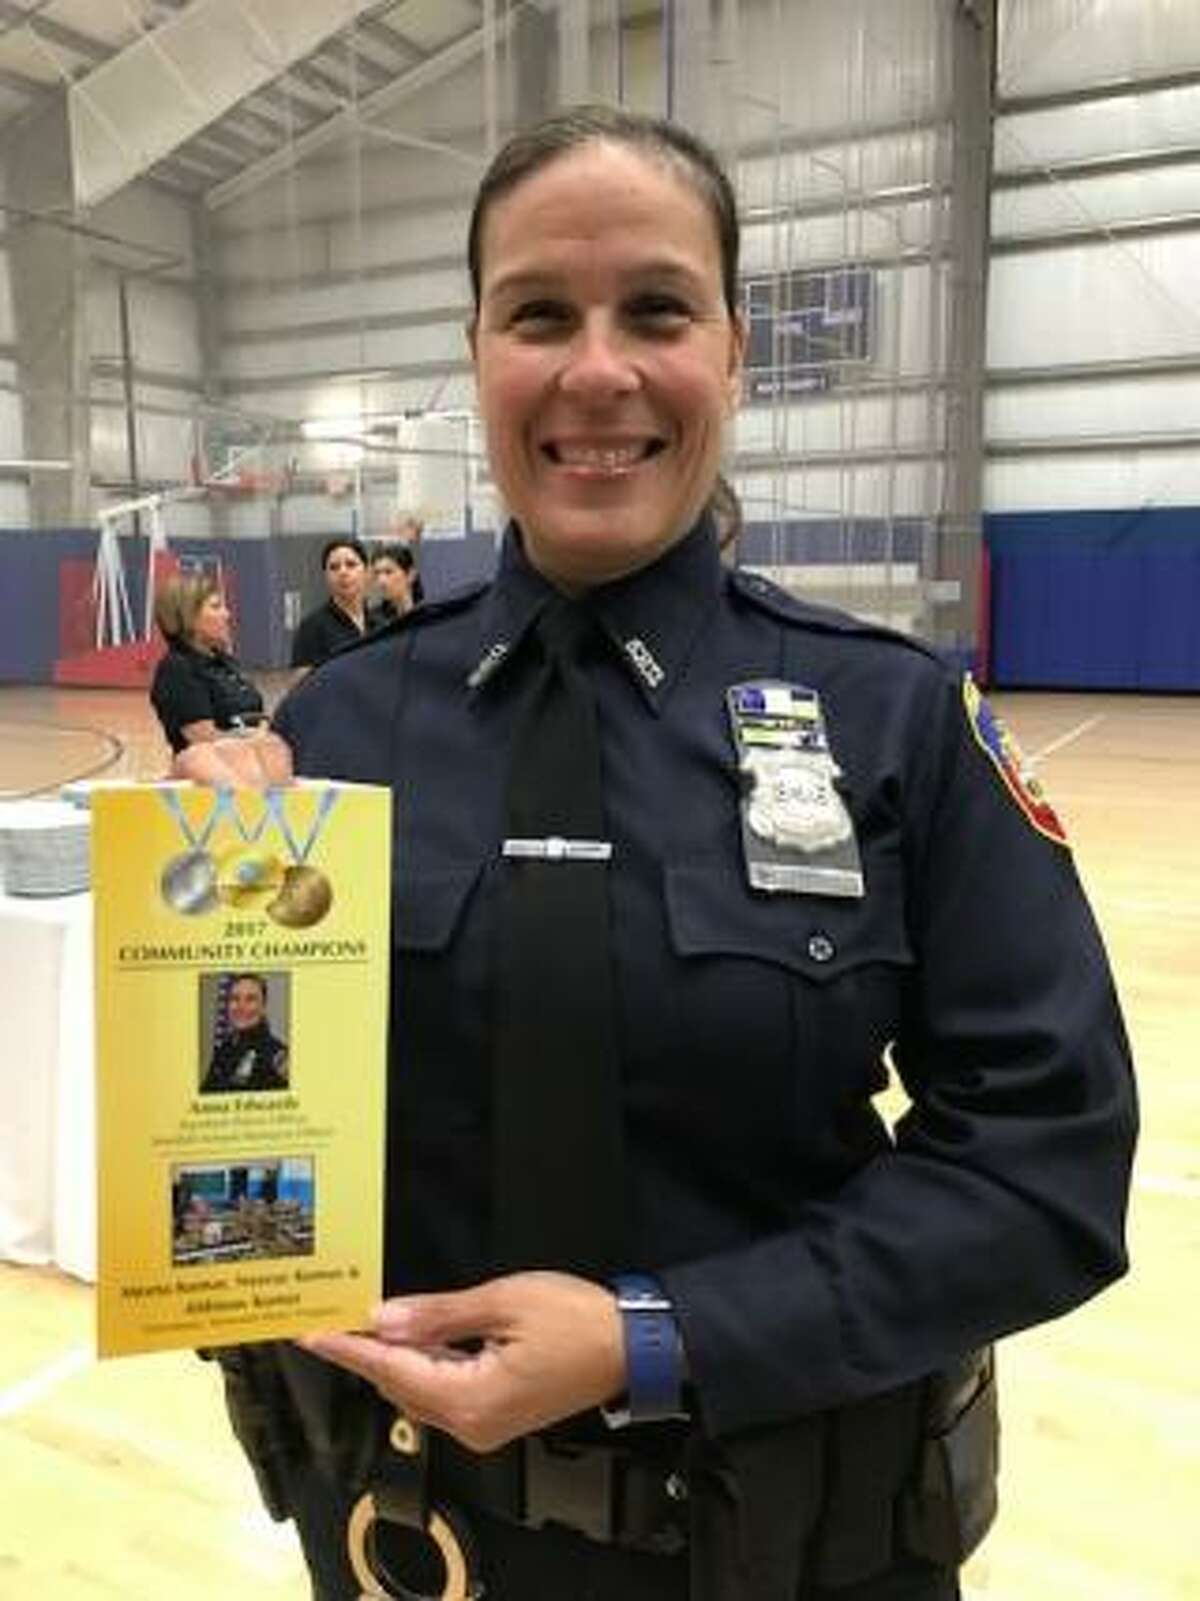 Officer Anna Edwards, one of the SROs at the school, was struck in the head with a full can of soda, causing a laceration and concussion. She was transported to the Stamford Hospital emergency room. An unidentified